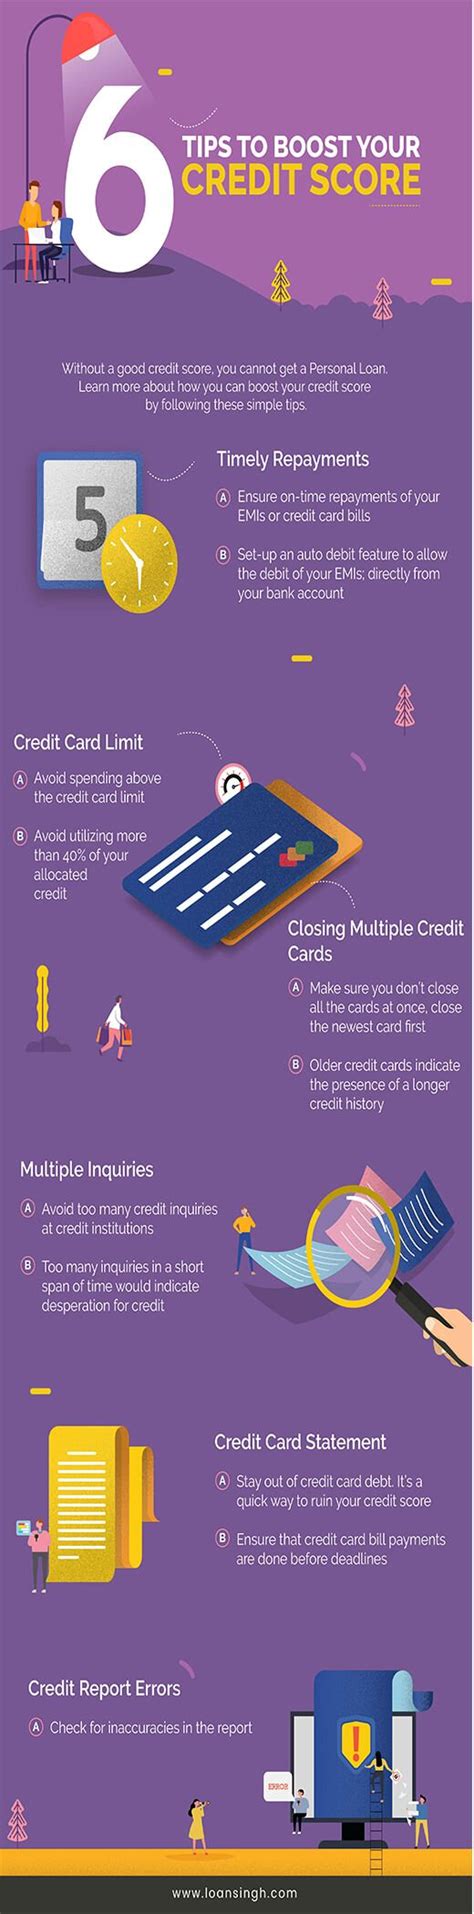 Find out how simple everything was made with the experian app and decide if it's right for you. Loan Singh's latest infographic gives you tips on 'How To ...